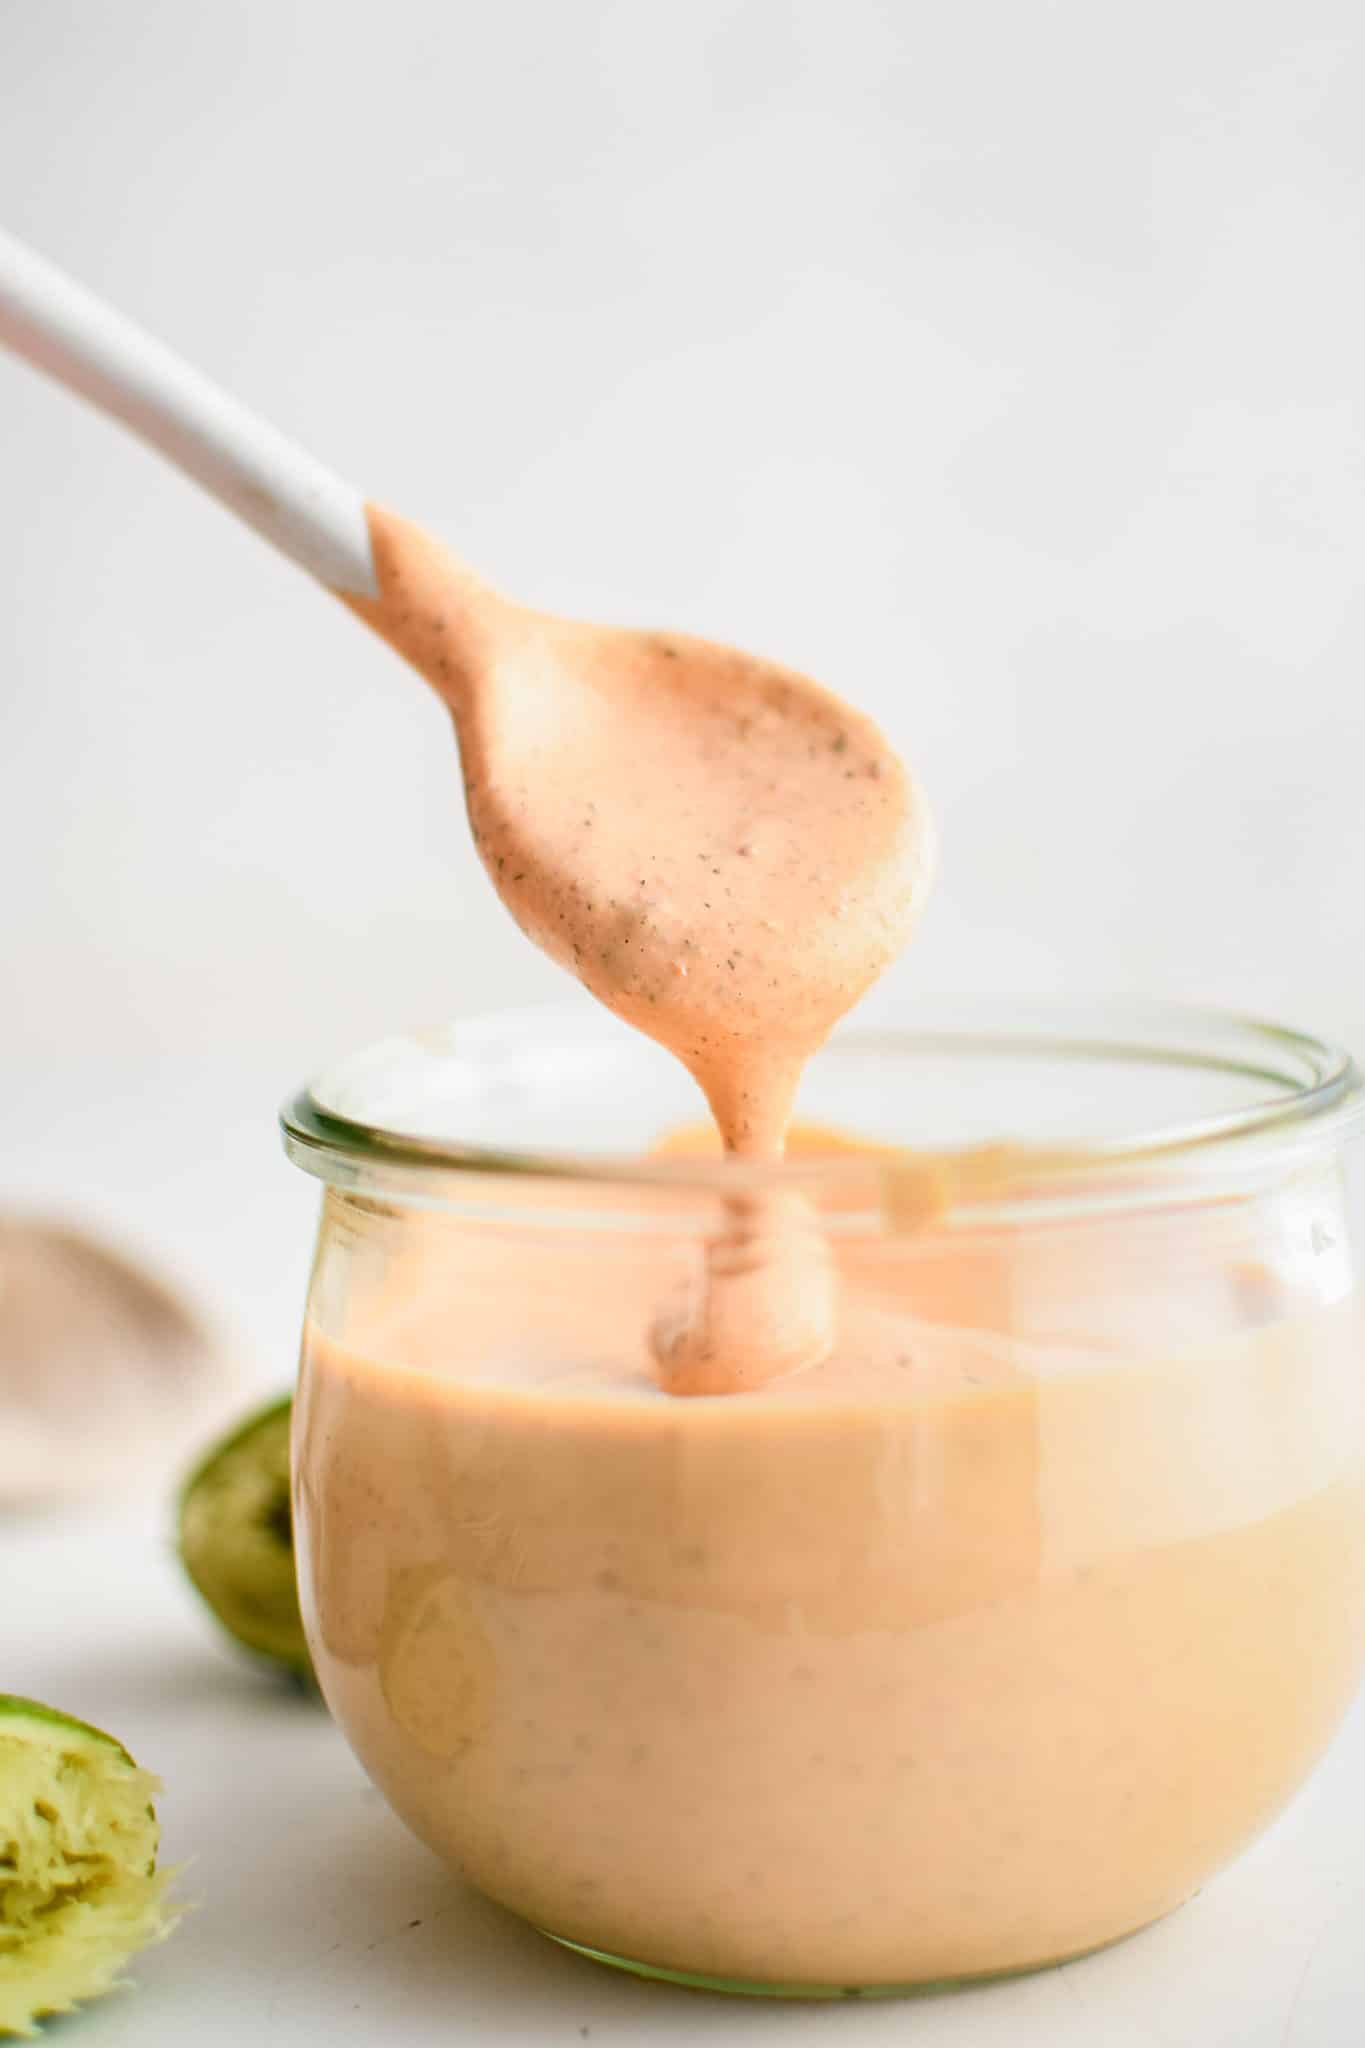 Small white spoon removing a spoonful of chipotle ranch dressing from a small glass jar.